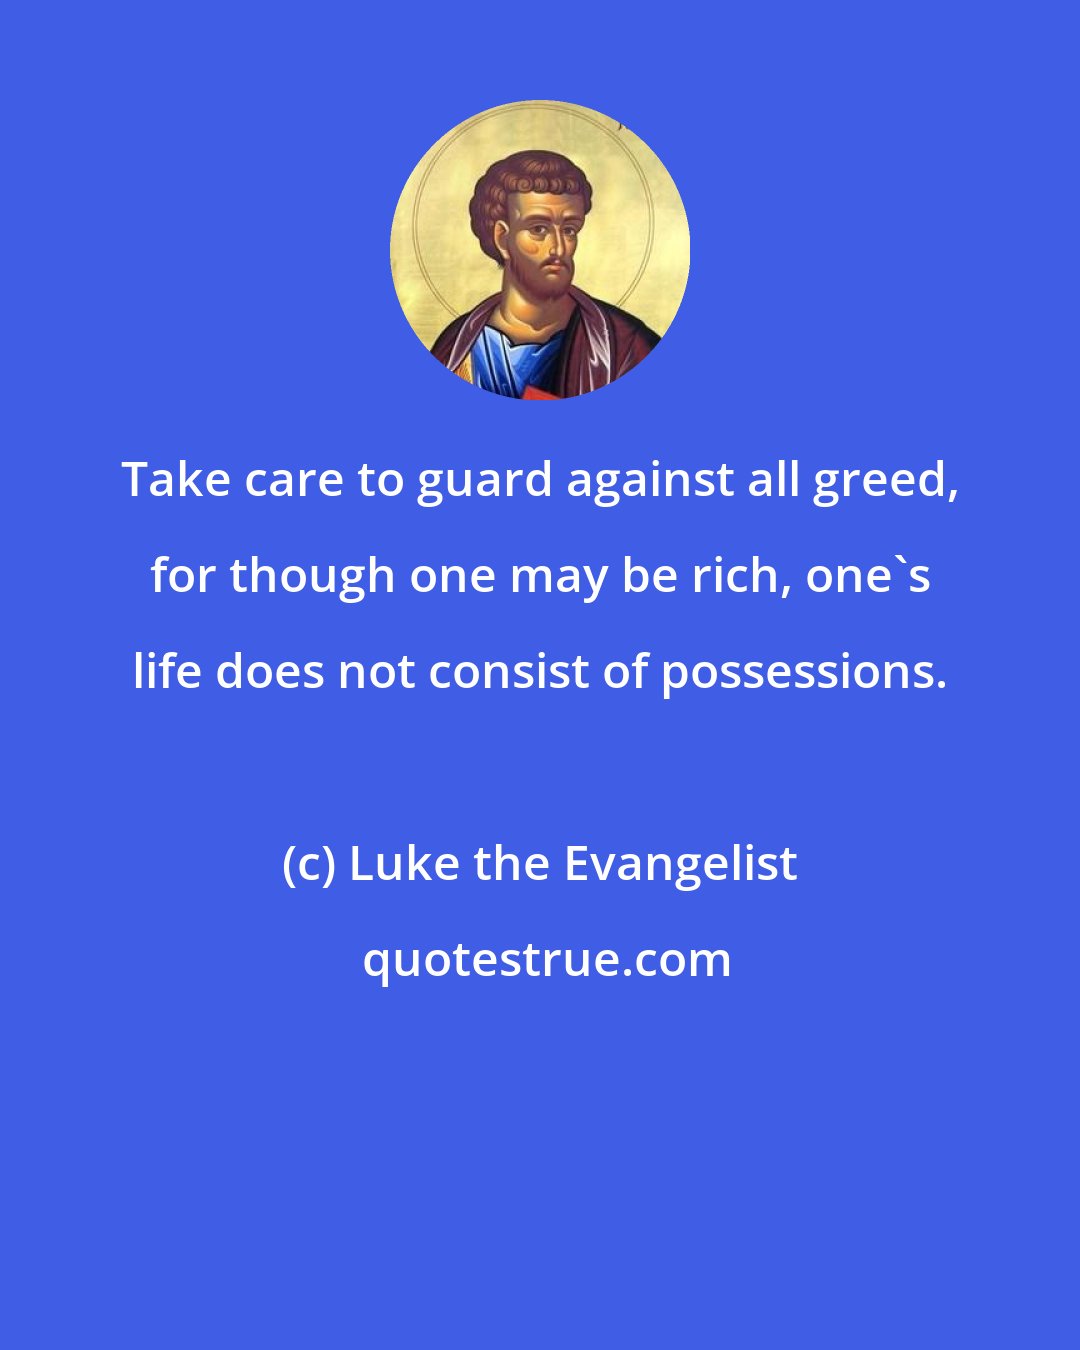 Luke the Evangelist: Take care to guard against all greed, for though one may be rich, one's life does not consist of possessions.